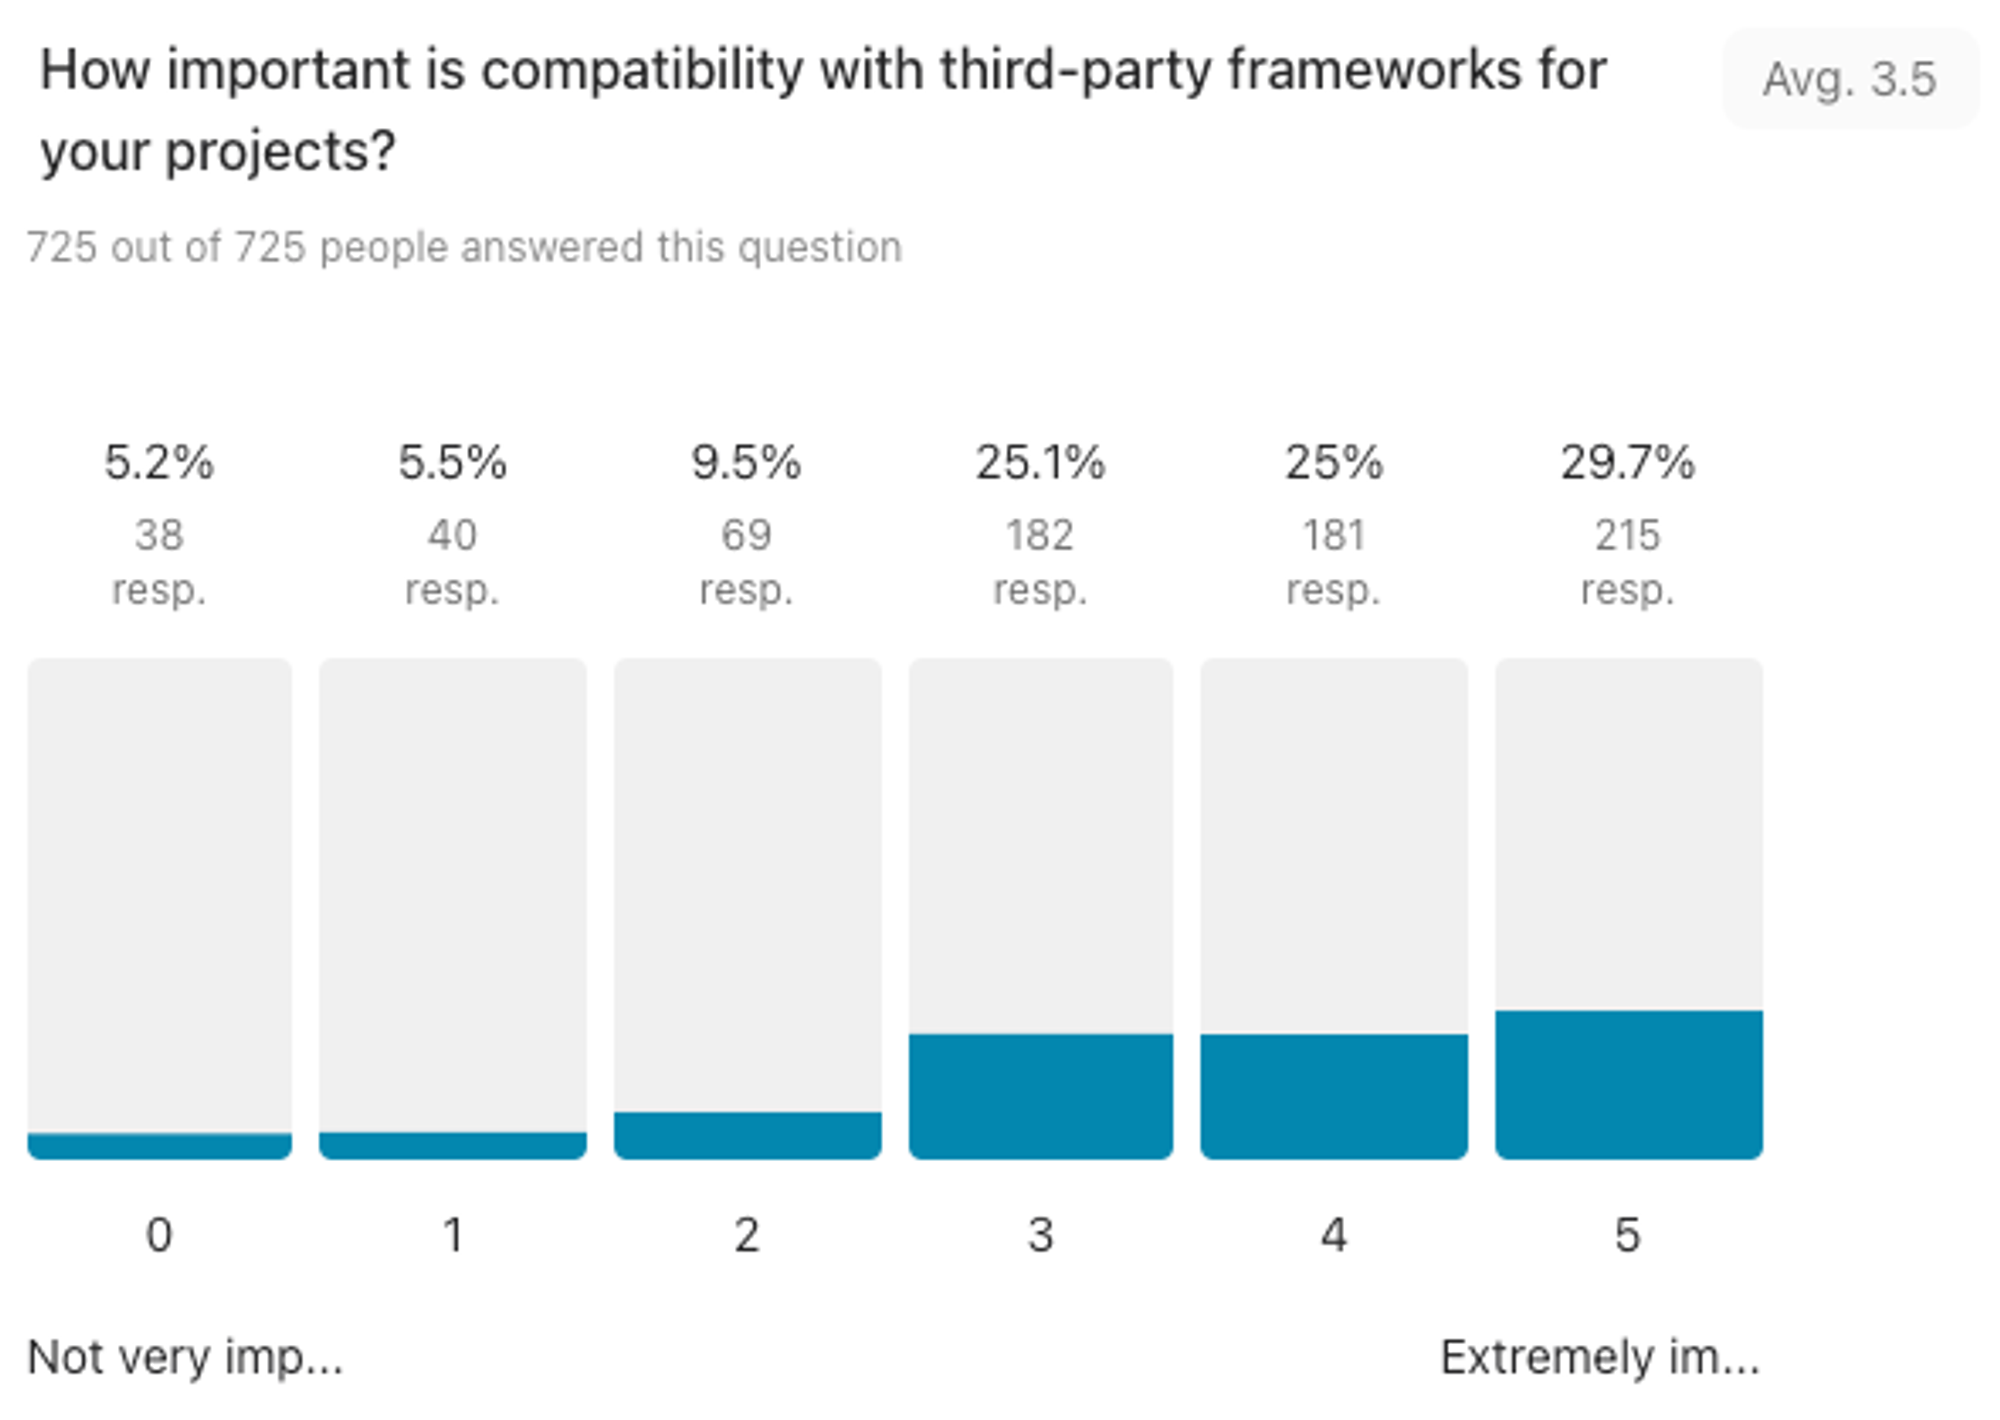 How important is third party framework compatibility with Deno